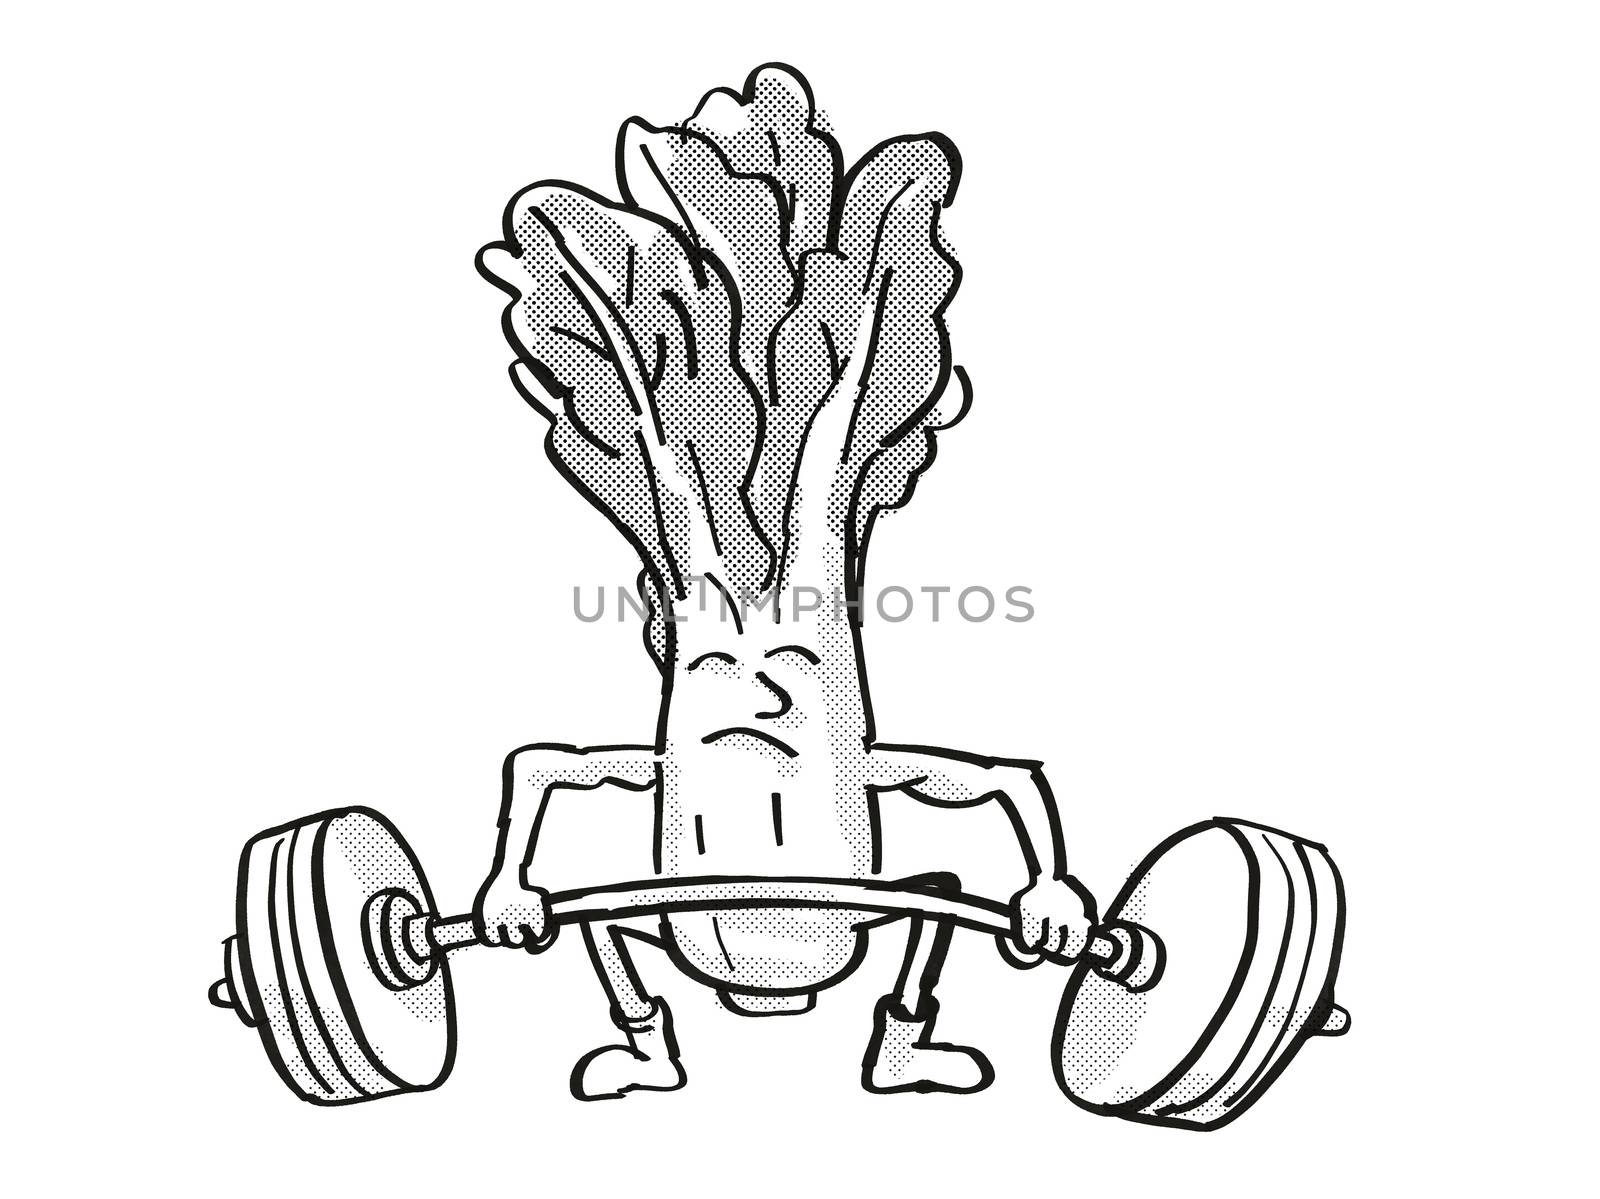 Retro cartoon style drawing of a Bok choy, pak choi or pok choi, a healthy vegetable lifting a barbell on isolated white background done in black and white.